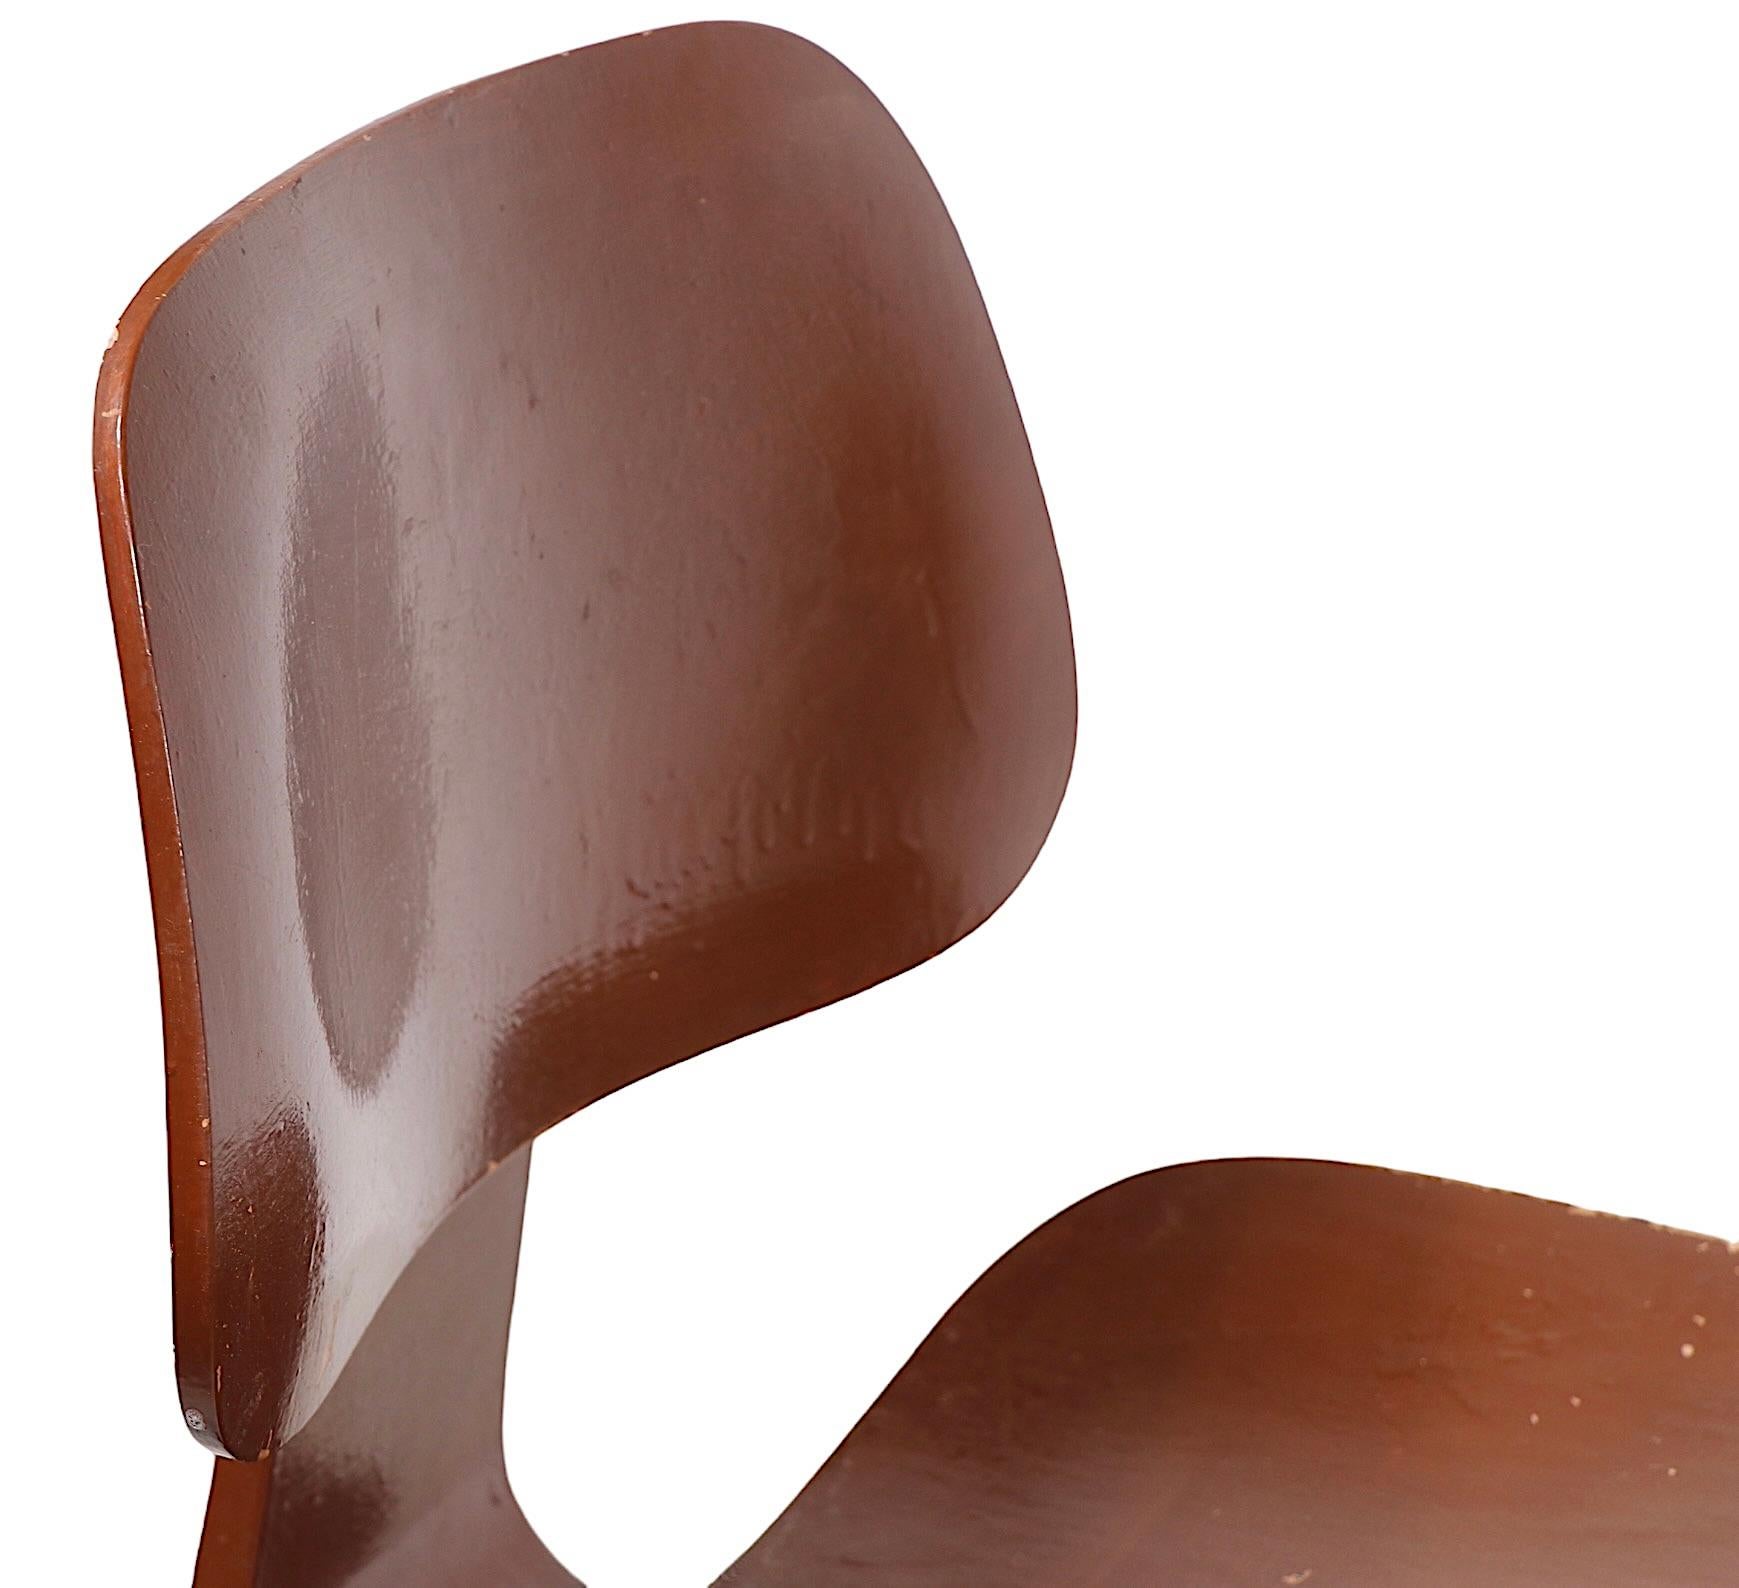  Early example of the classic Eames DCW, having the large oval rubber bumper which is attached to the backrest. This example is structurally sound and sturdy, it has been painted brown, as shown. Usable as is or you could have it stripped and